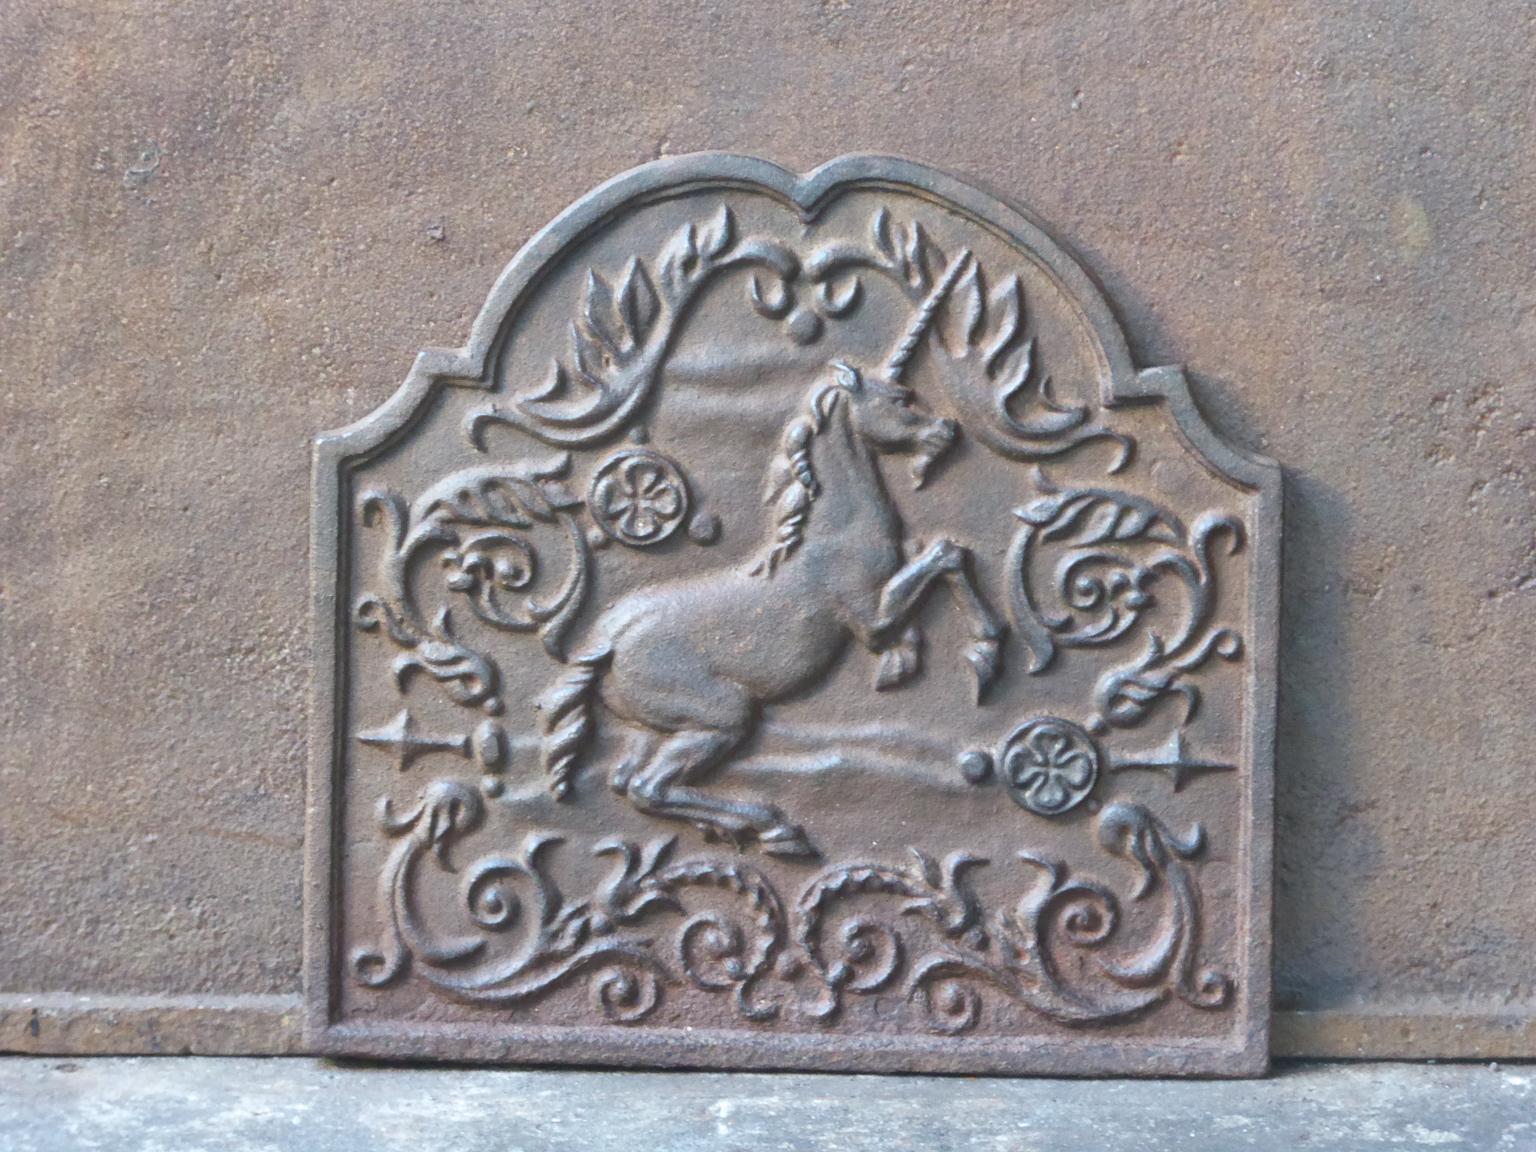 20th century Victorian fireback with an unicorn surrounded by various decorations. The fireback is made of cast iron and has a natural brown patina. Upon request it can be made black. The fireback is in a good condition and does not have